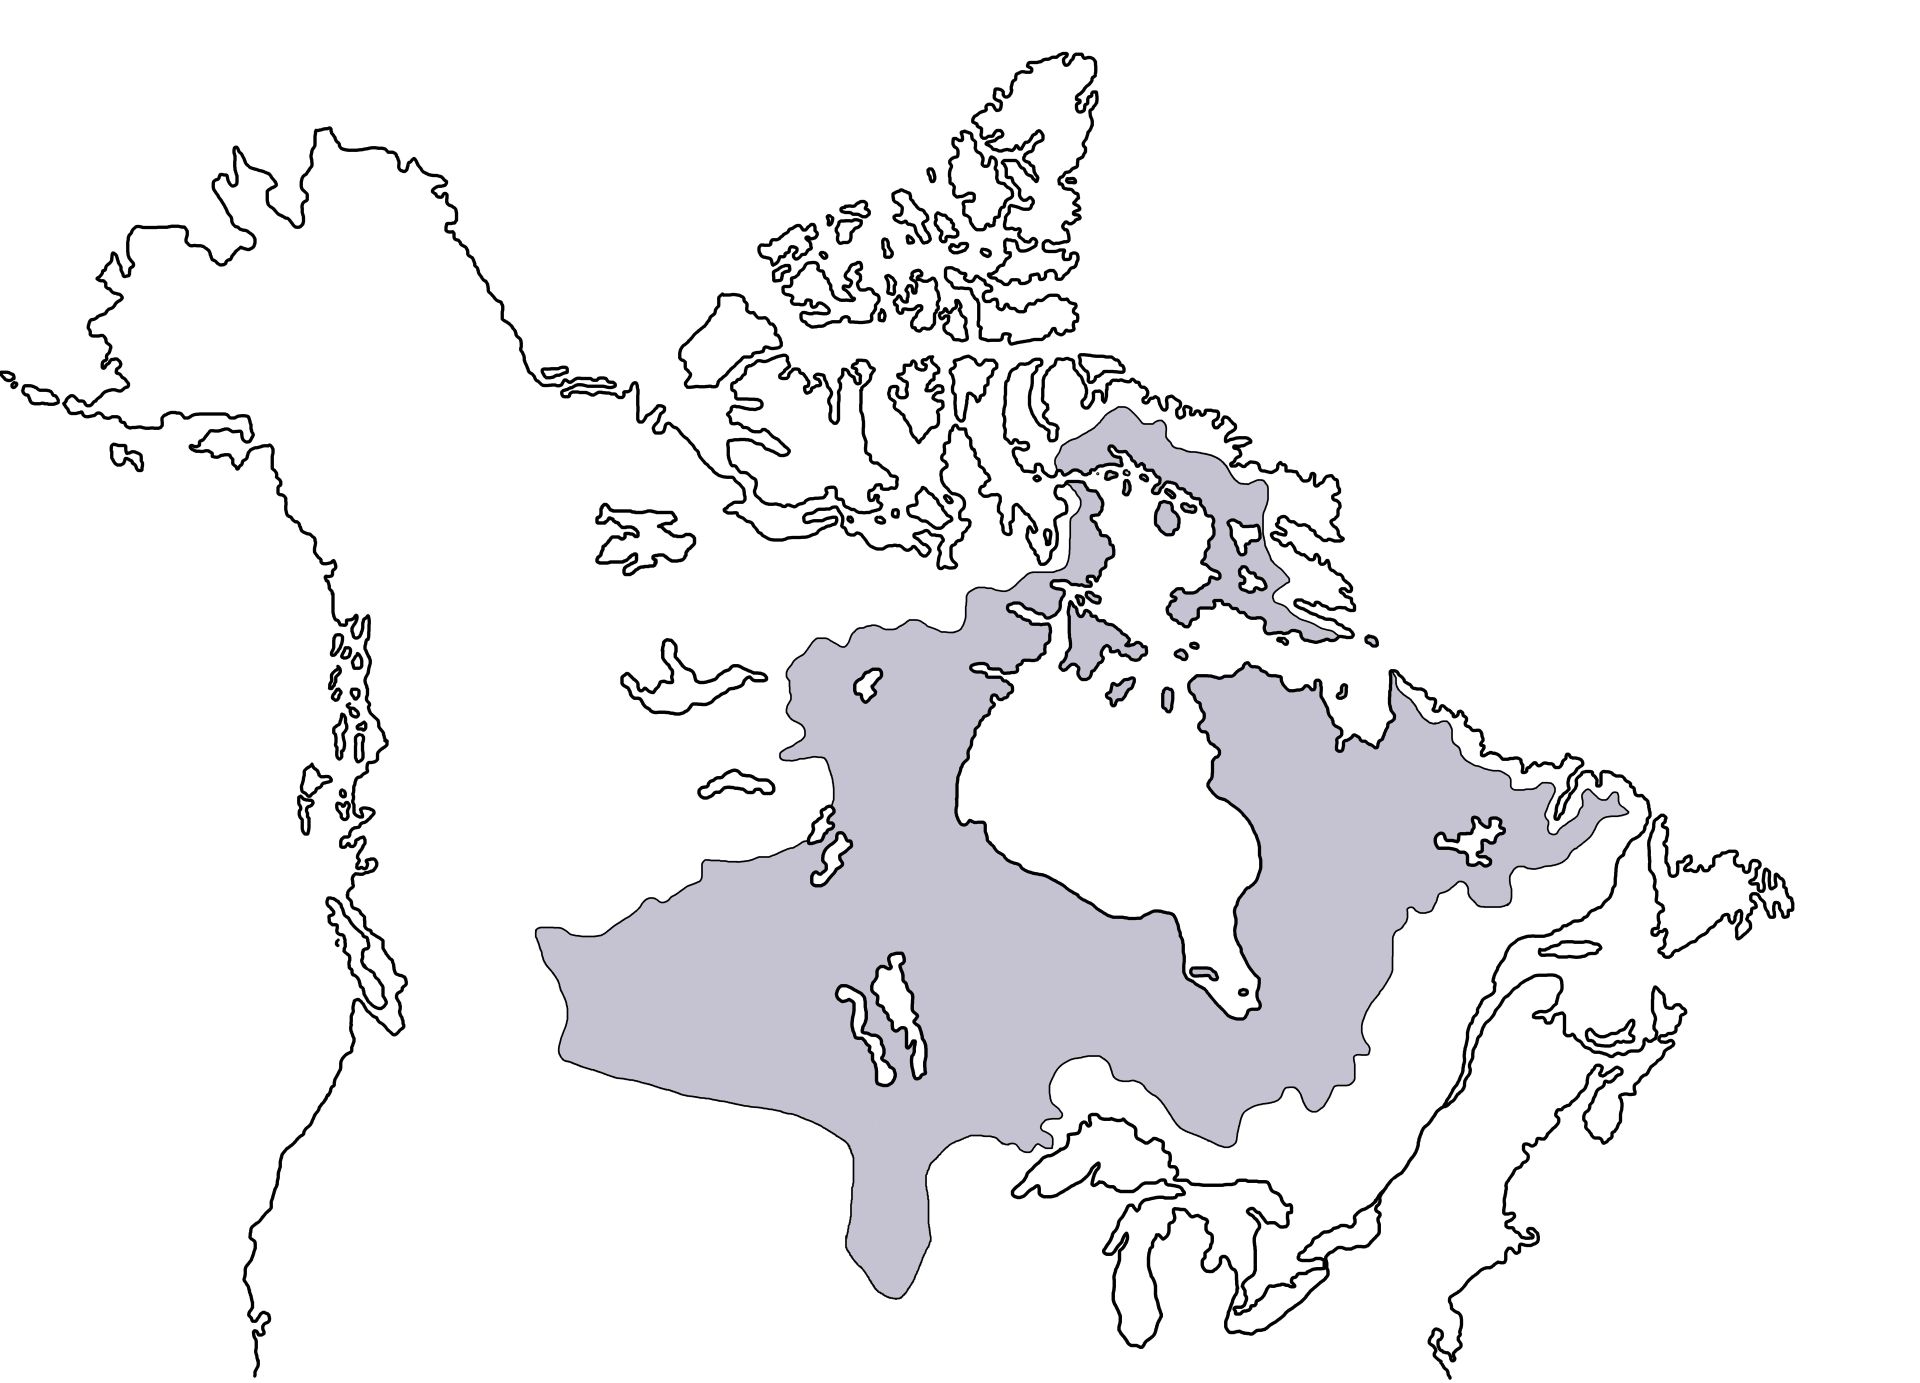 A map of Rupert's Land overlaid over the continent of North America.